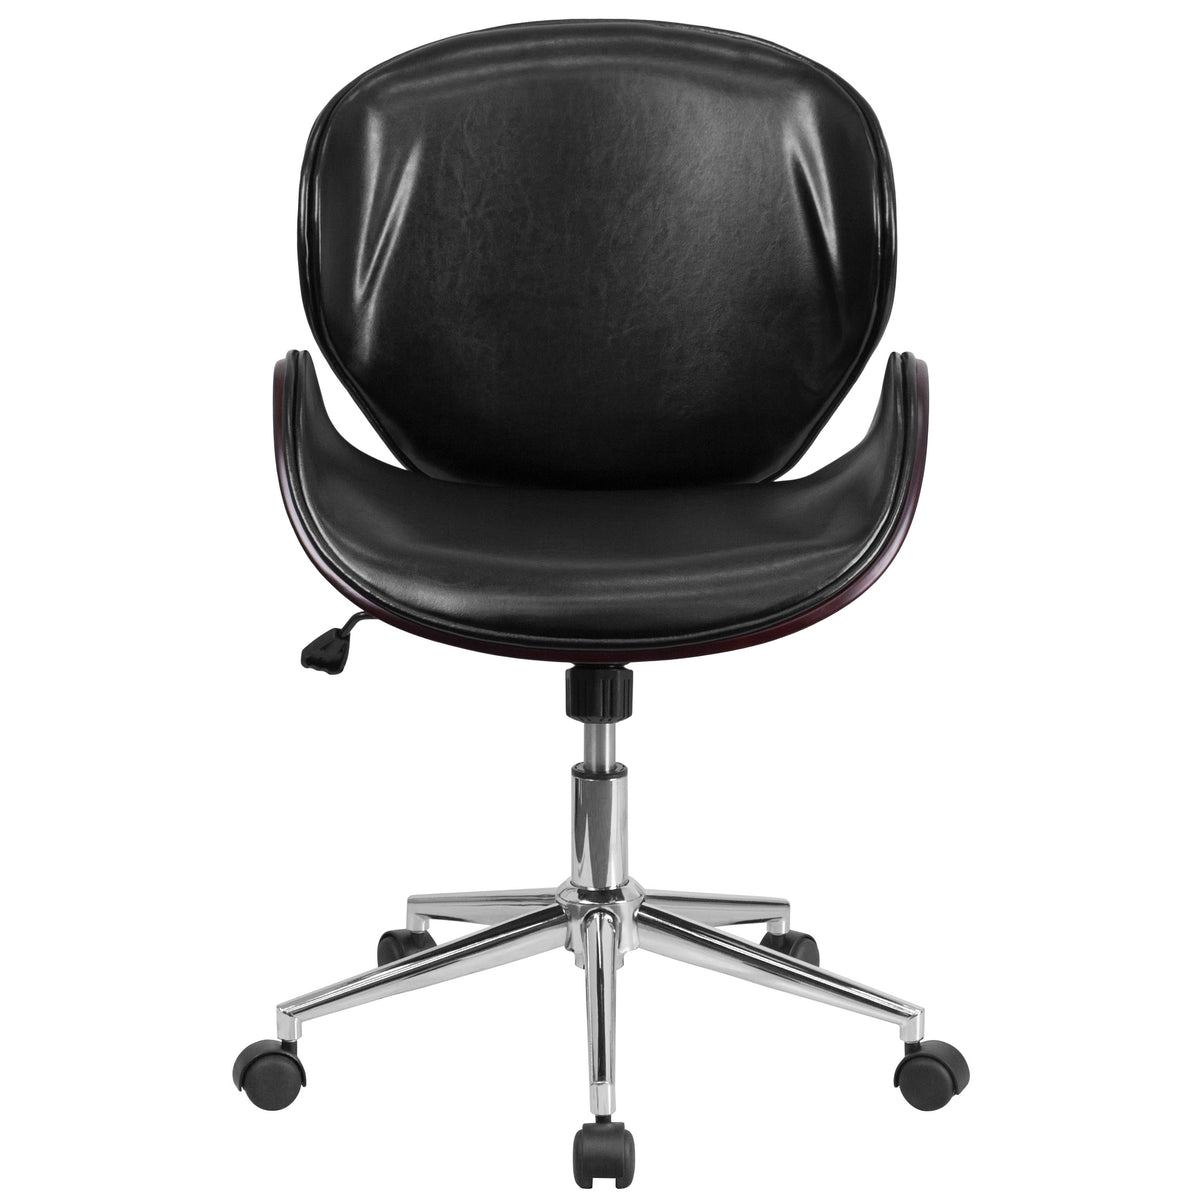 Black LeatherSoft/Mahogany Frame |#| Mid-Back Mahogany Wood Conference Office Chair in Black LeatherSoft